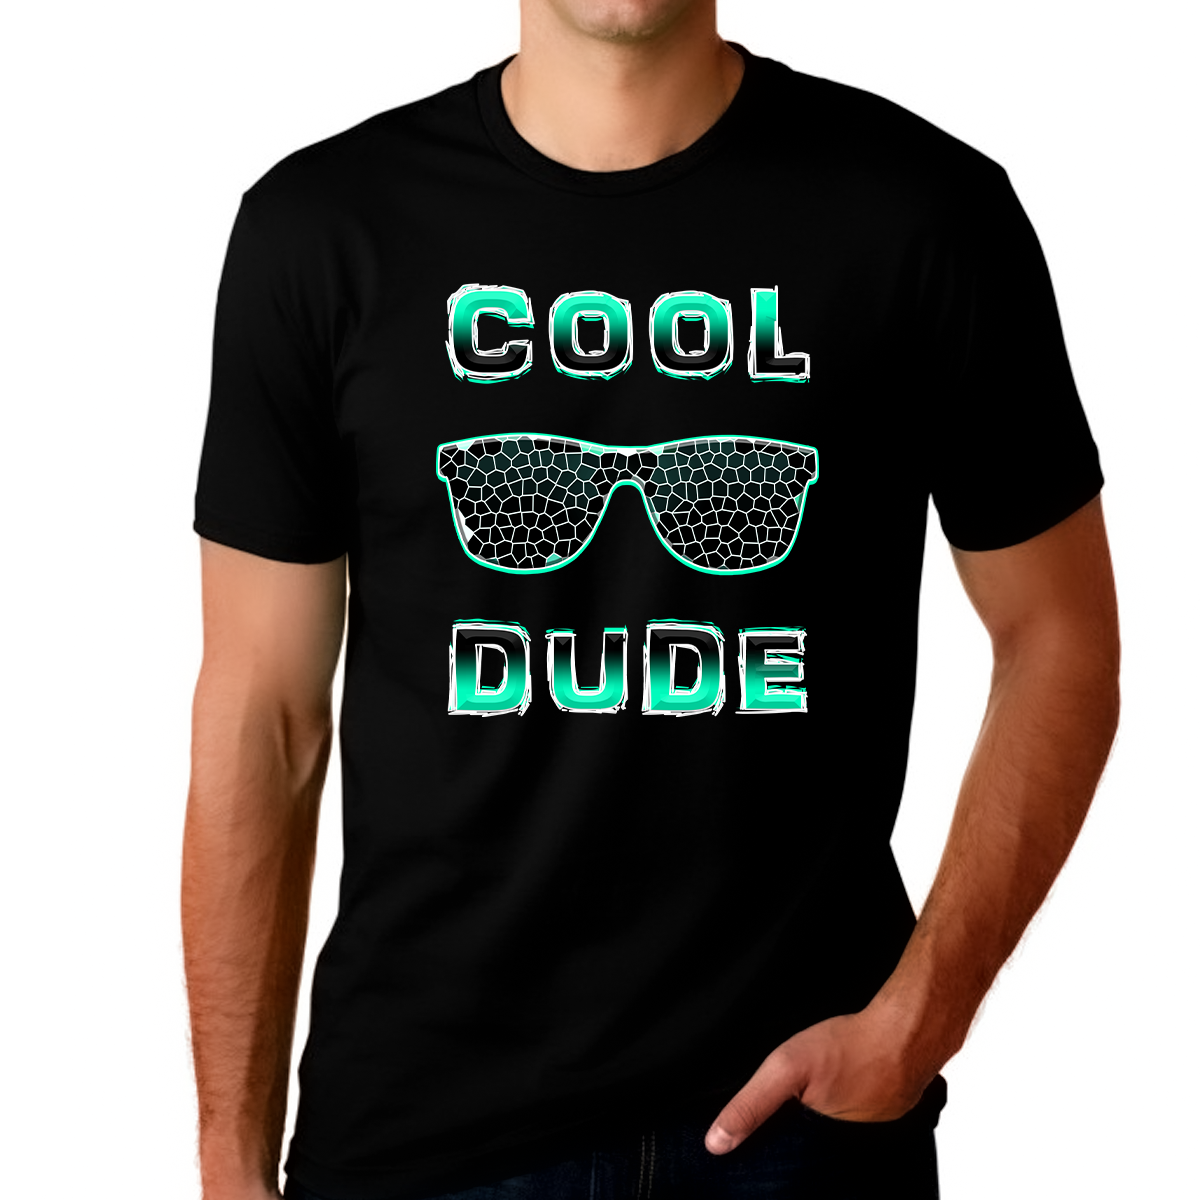 Perfect Dude Shirt for MEN - Perfect Dude Merchandise - Perfect Dude Cool Dude TShirts for MEN - Fire Fit Designs